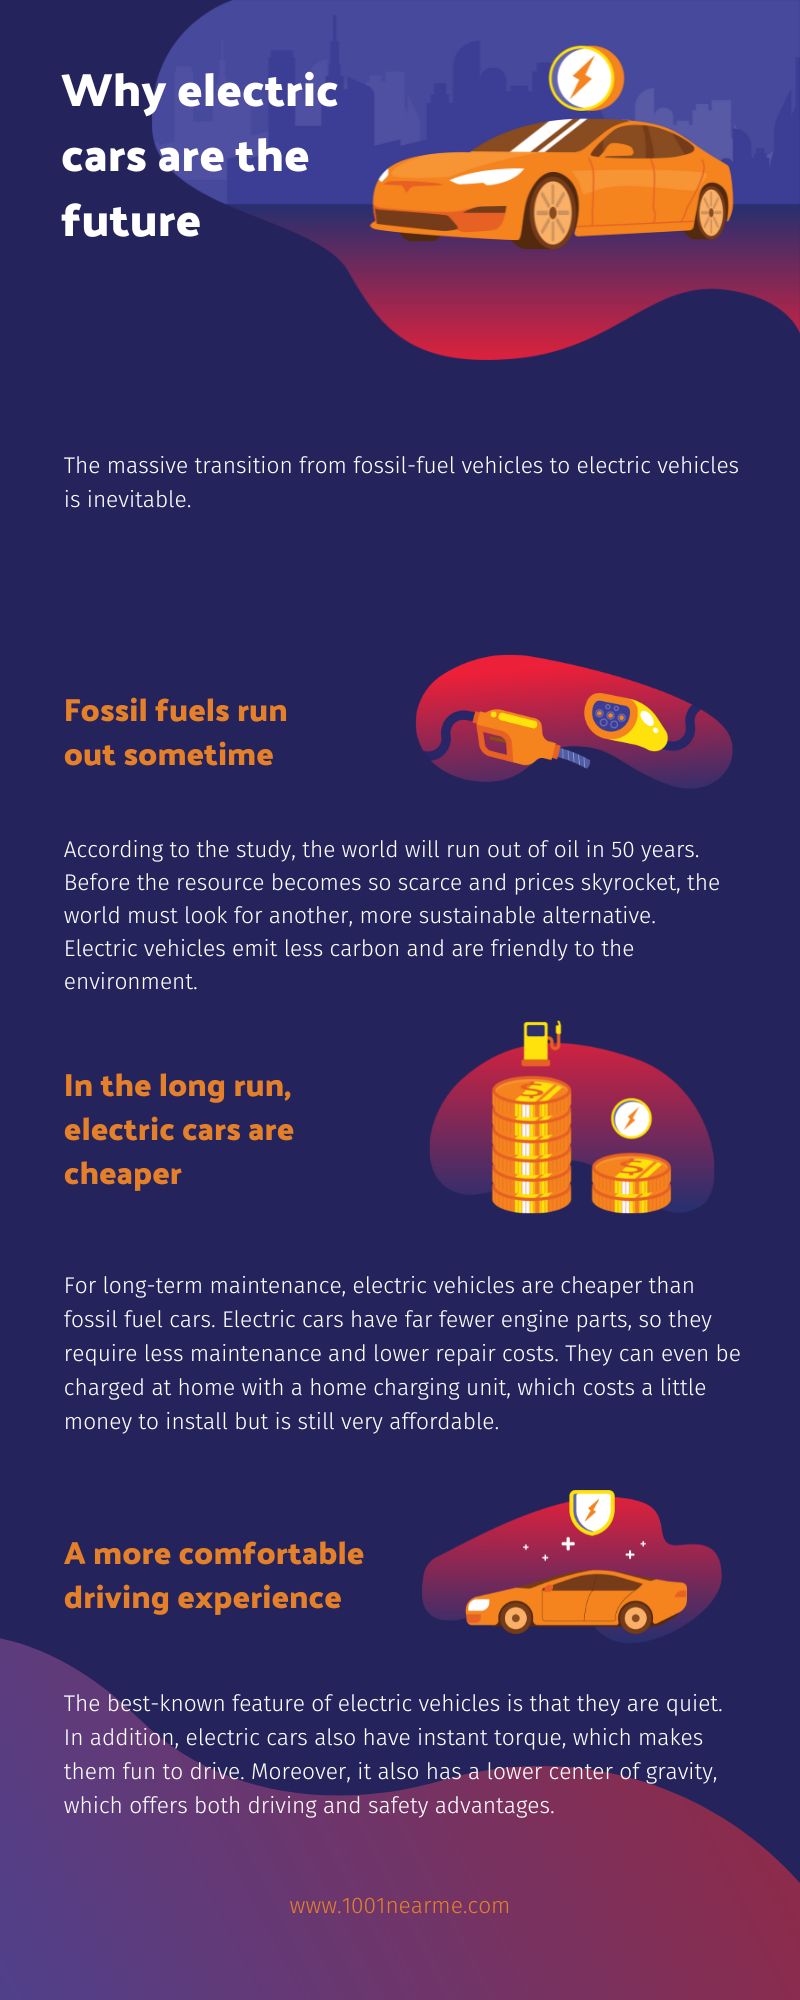 Why Electric Vehicles are the Future Infographic